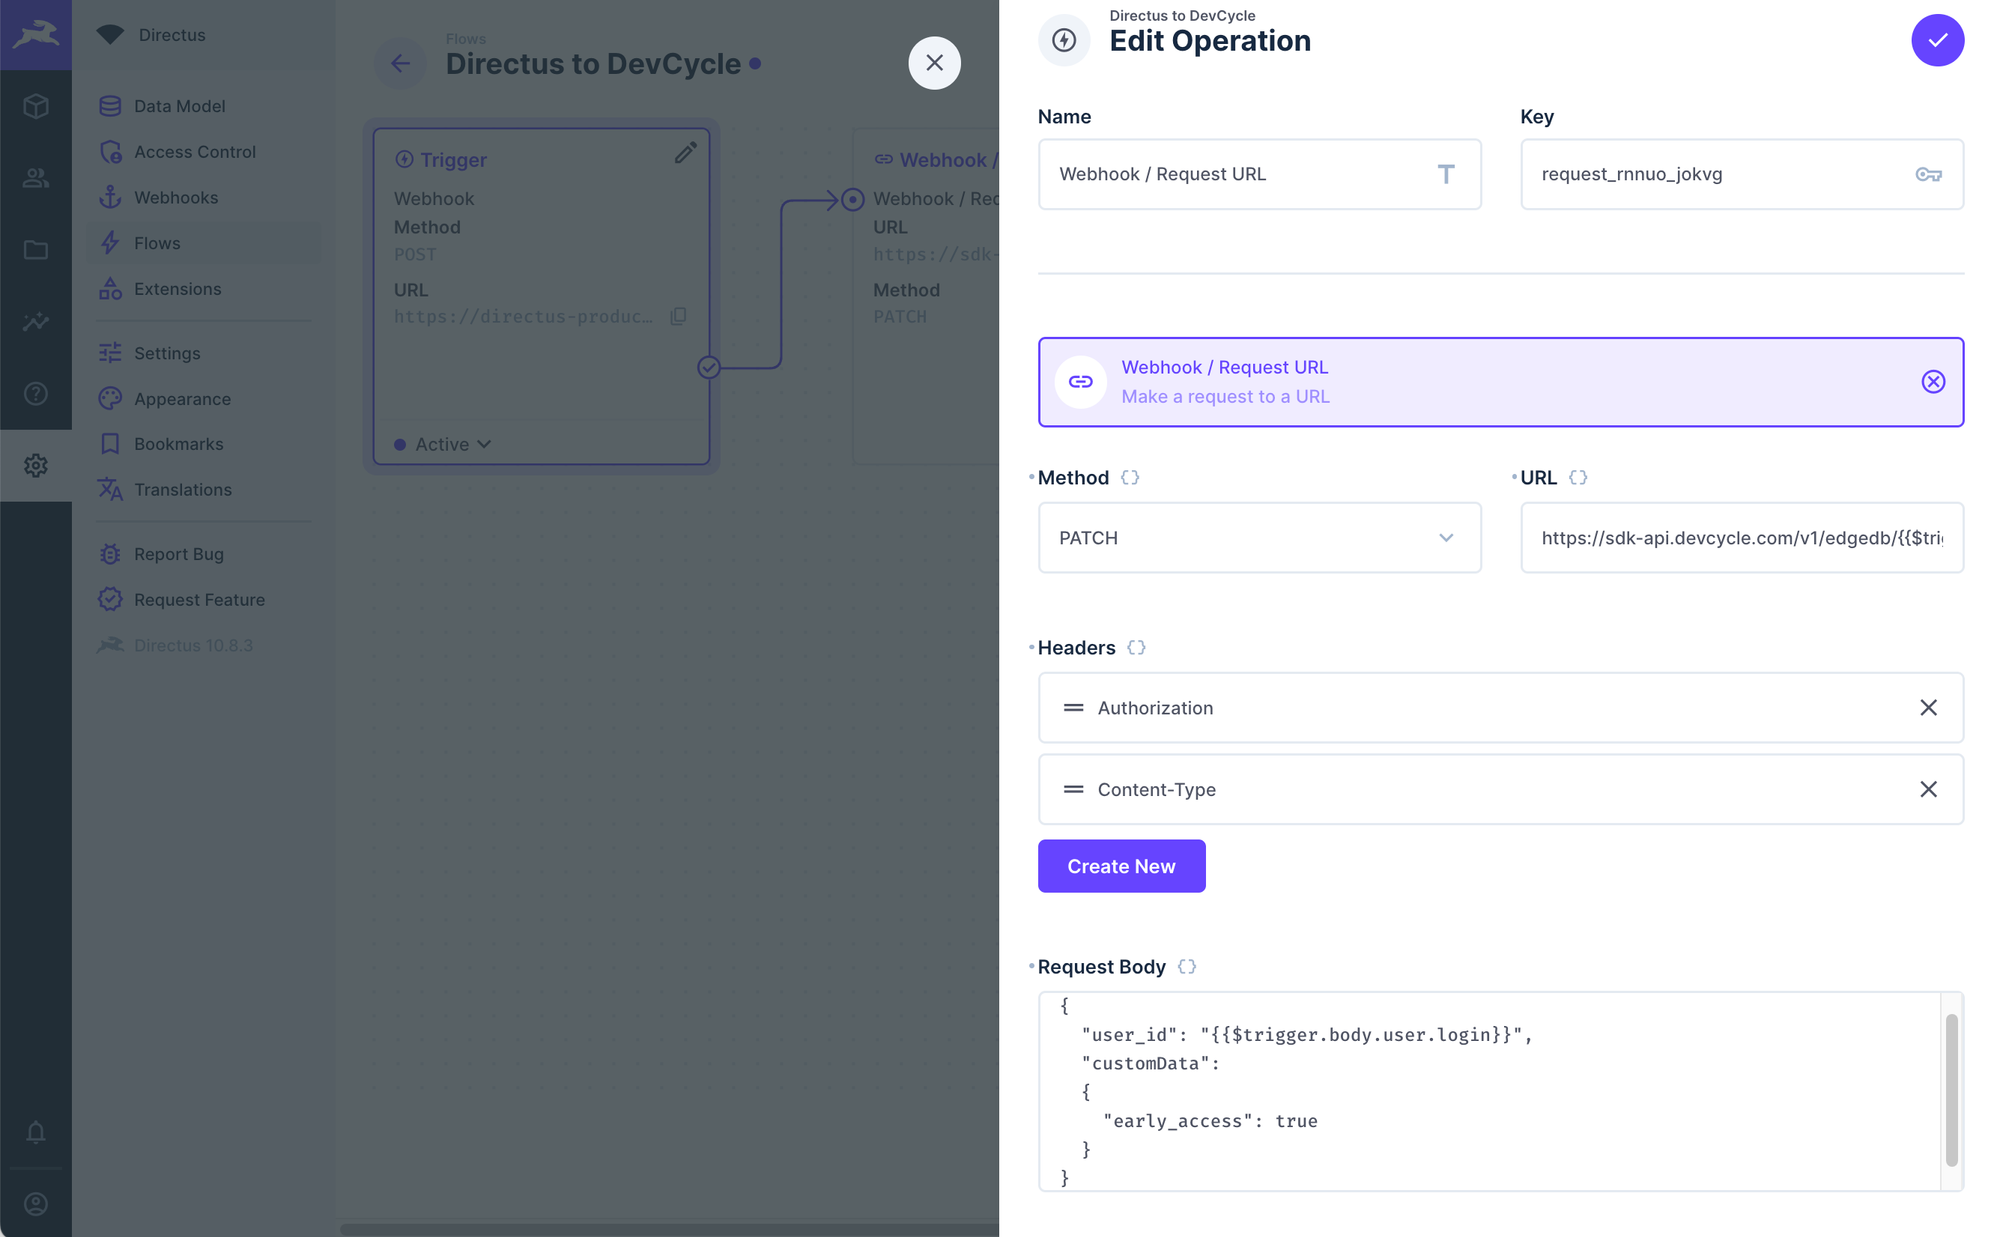 Building an Early Access Site with DevCycle's EdgeDB & Directus Flows